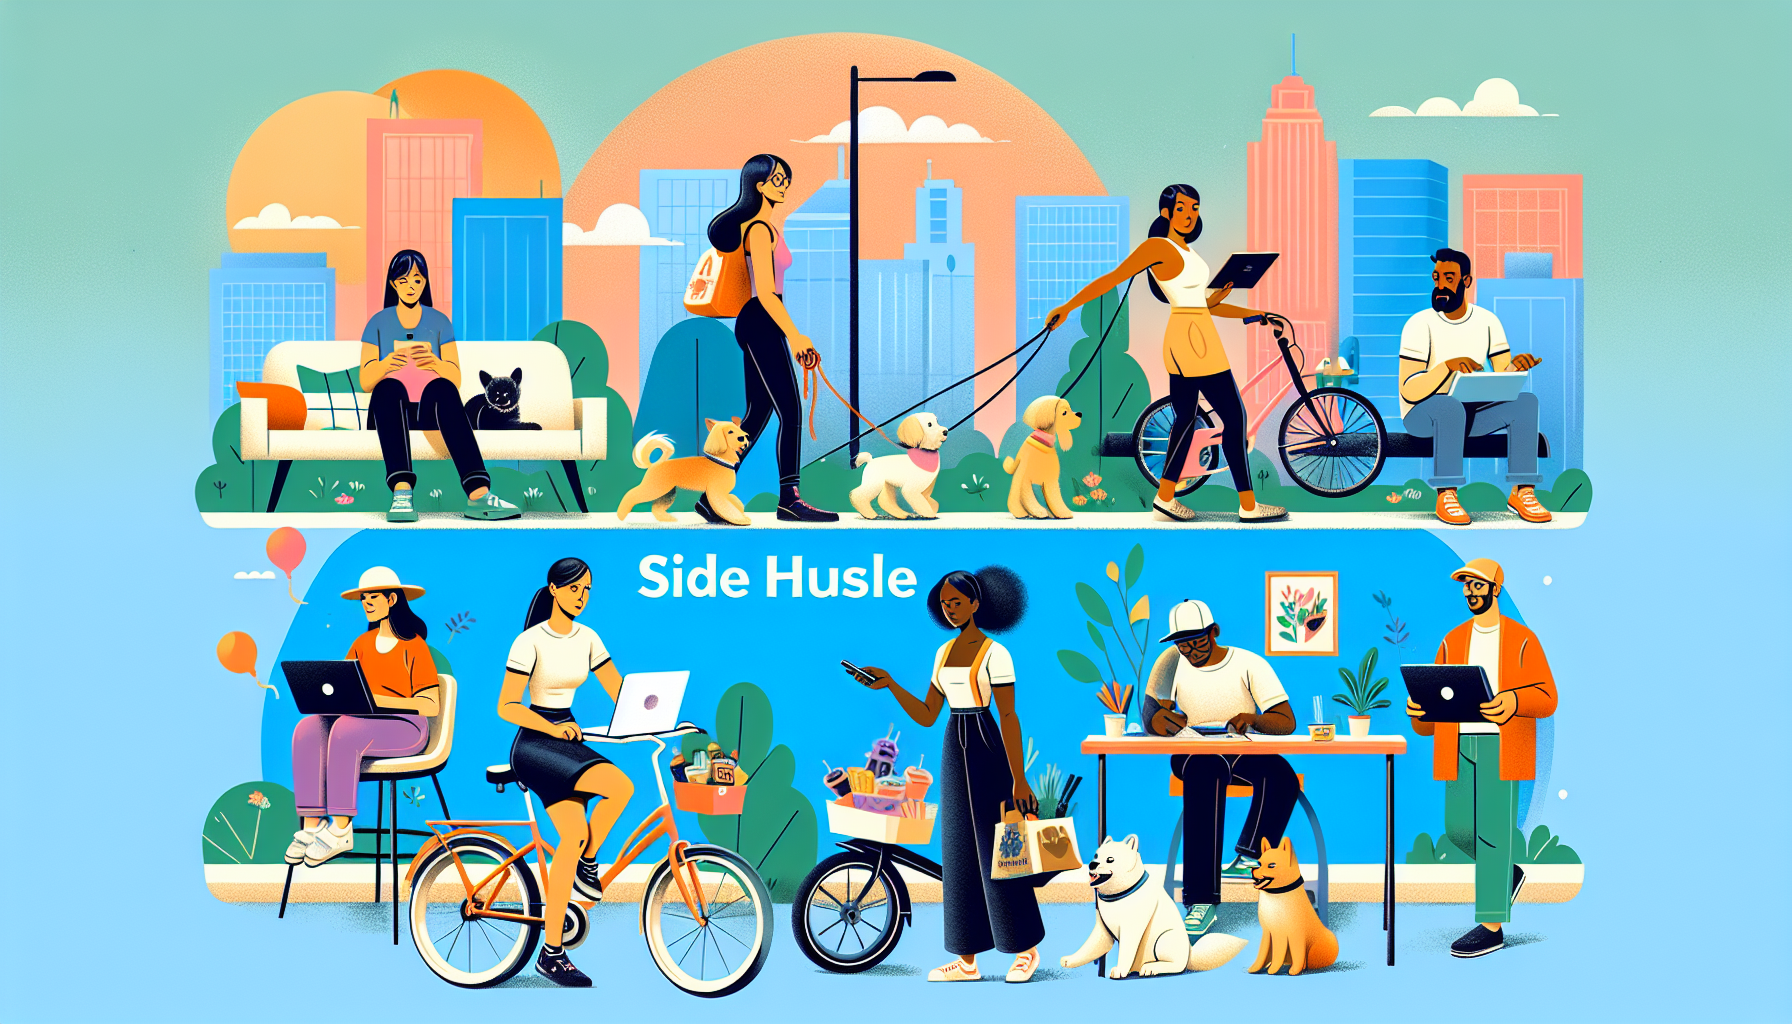 Create a colorful and dynamic illustration that showcases a variety of top side hustles for 2022. The image should feature diverse individuals engaging in activities like freelance graphic design on a laptop, dog walking in a park, delivering food on a bicycle, selling handmade crafts online, tutoring a student, and driving for a rideshare service. The background could be a modern urban setting to reflect the contemporary nature of these side hustles.